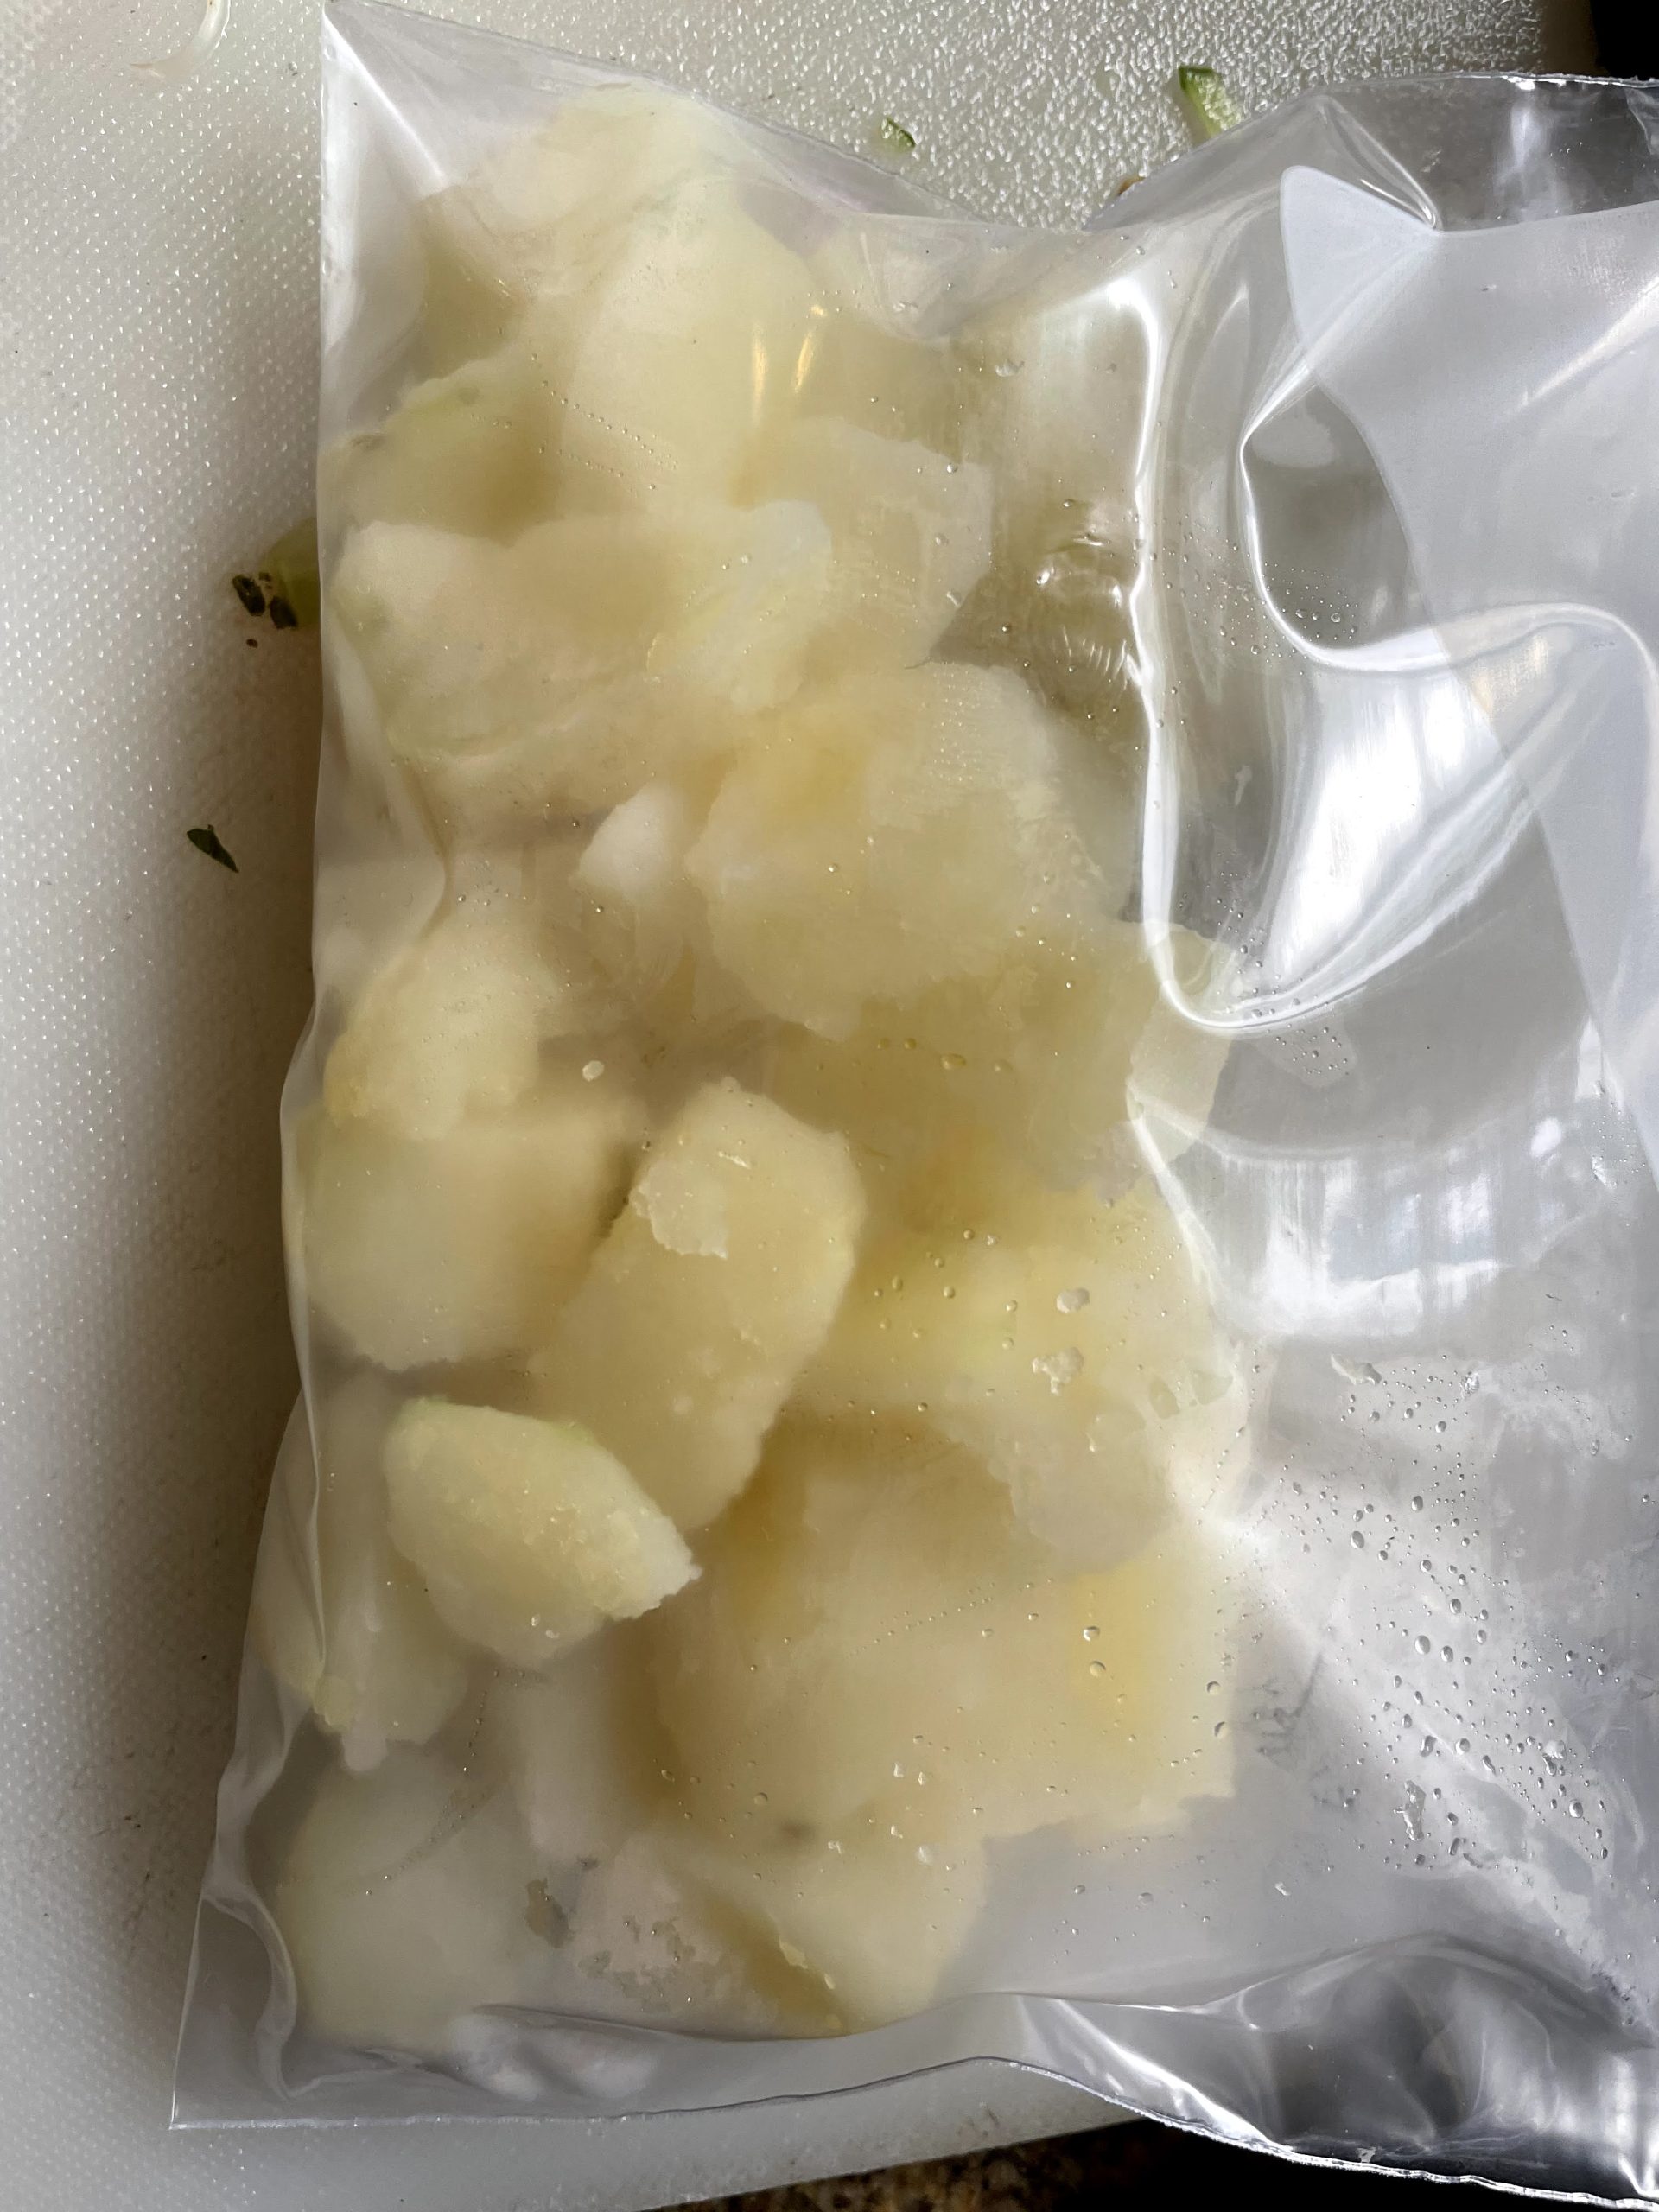 Place cooked potatoes in freezer bag.